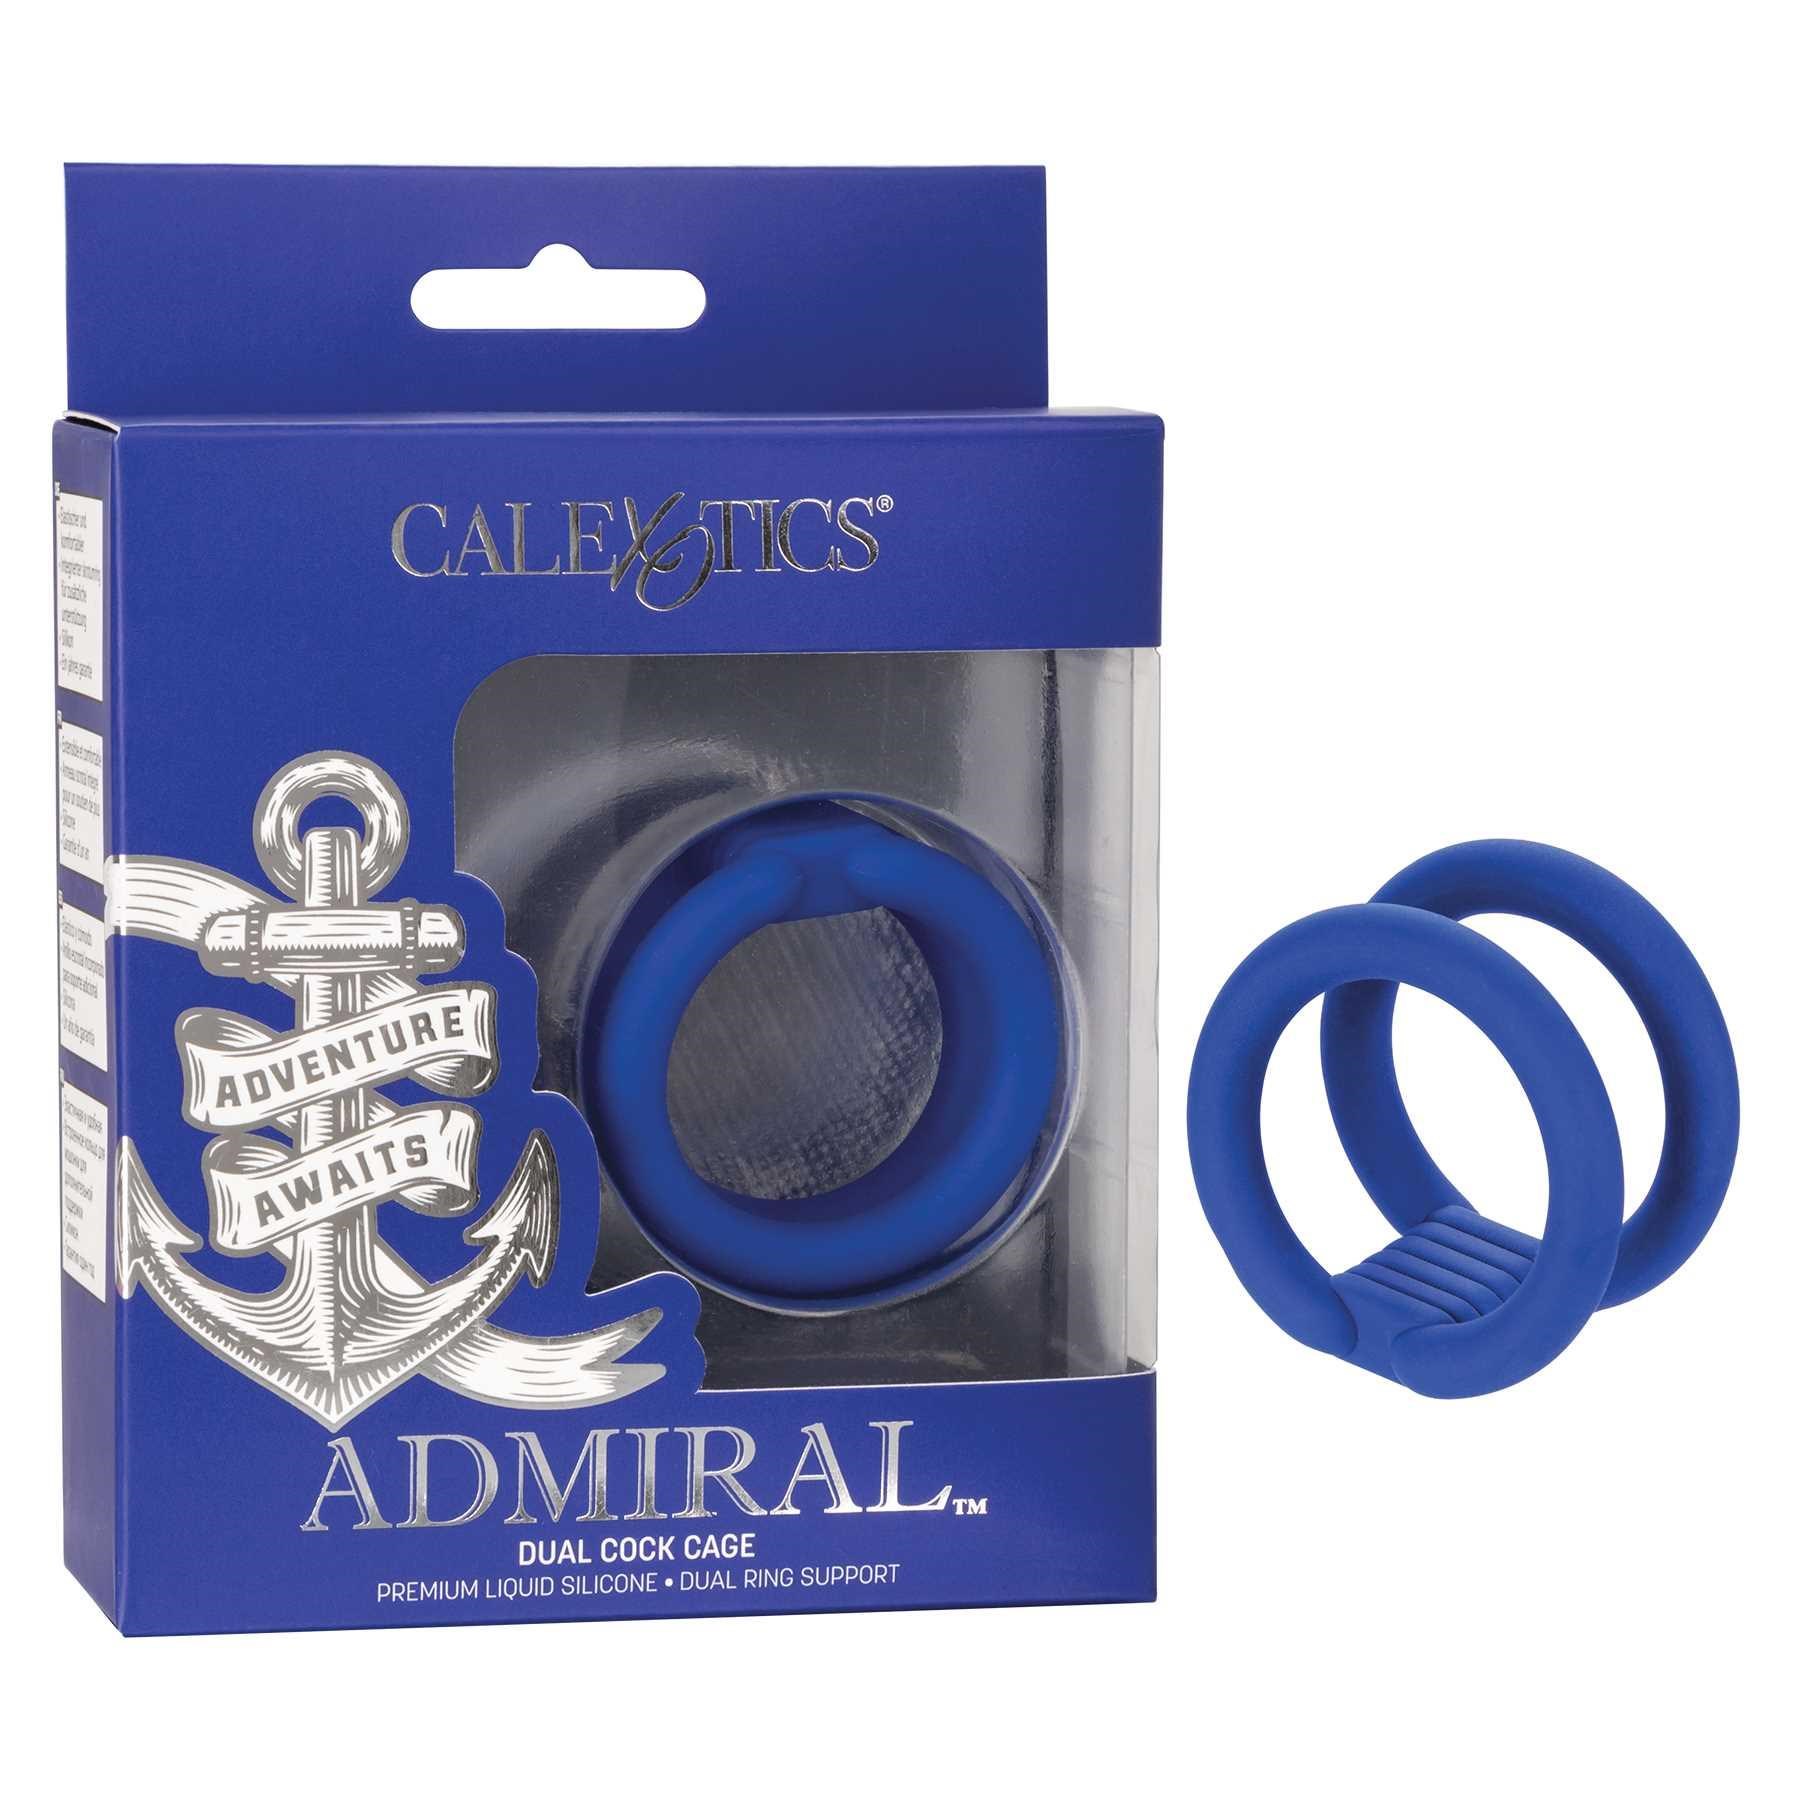 Admiral Dual Cock Cage with box packaging